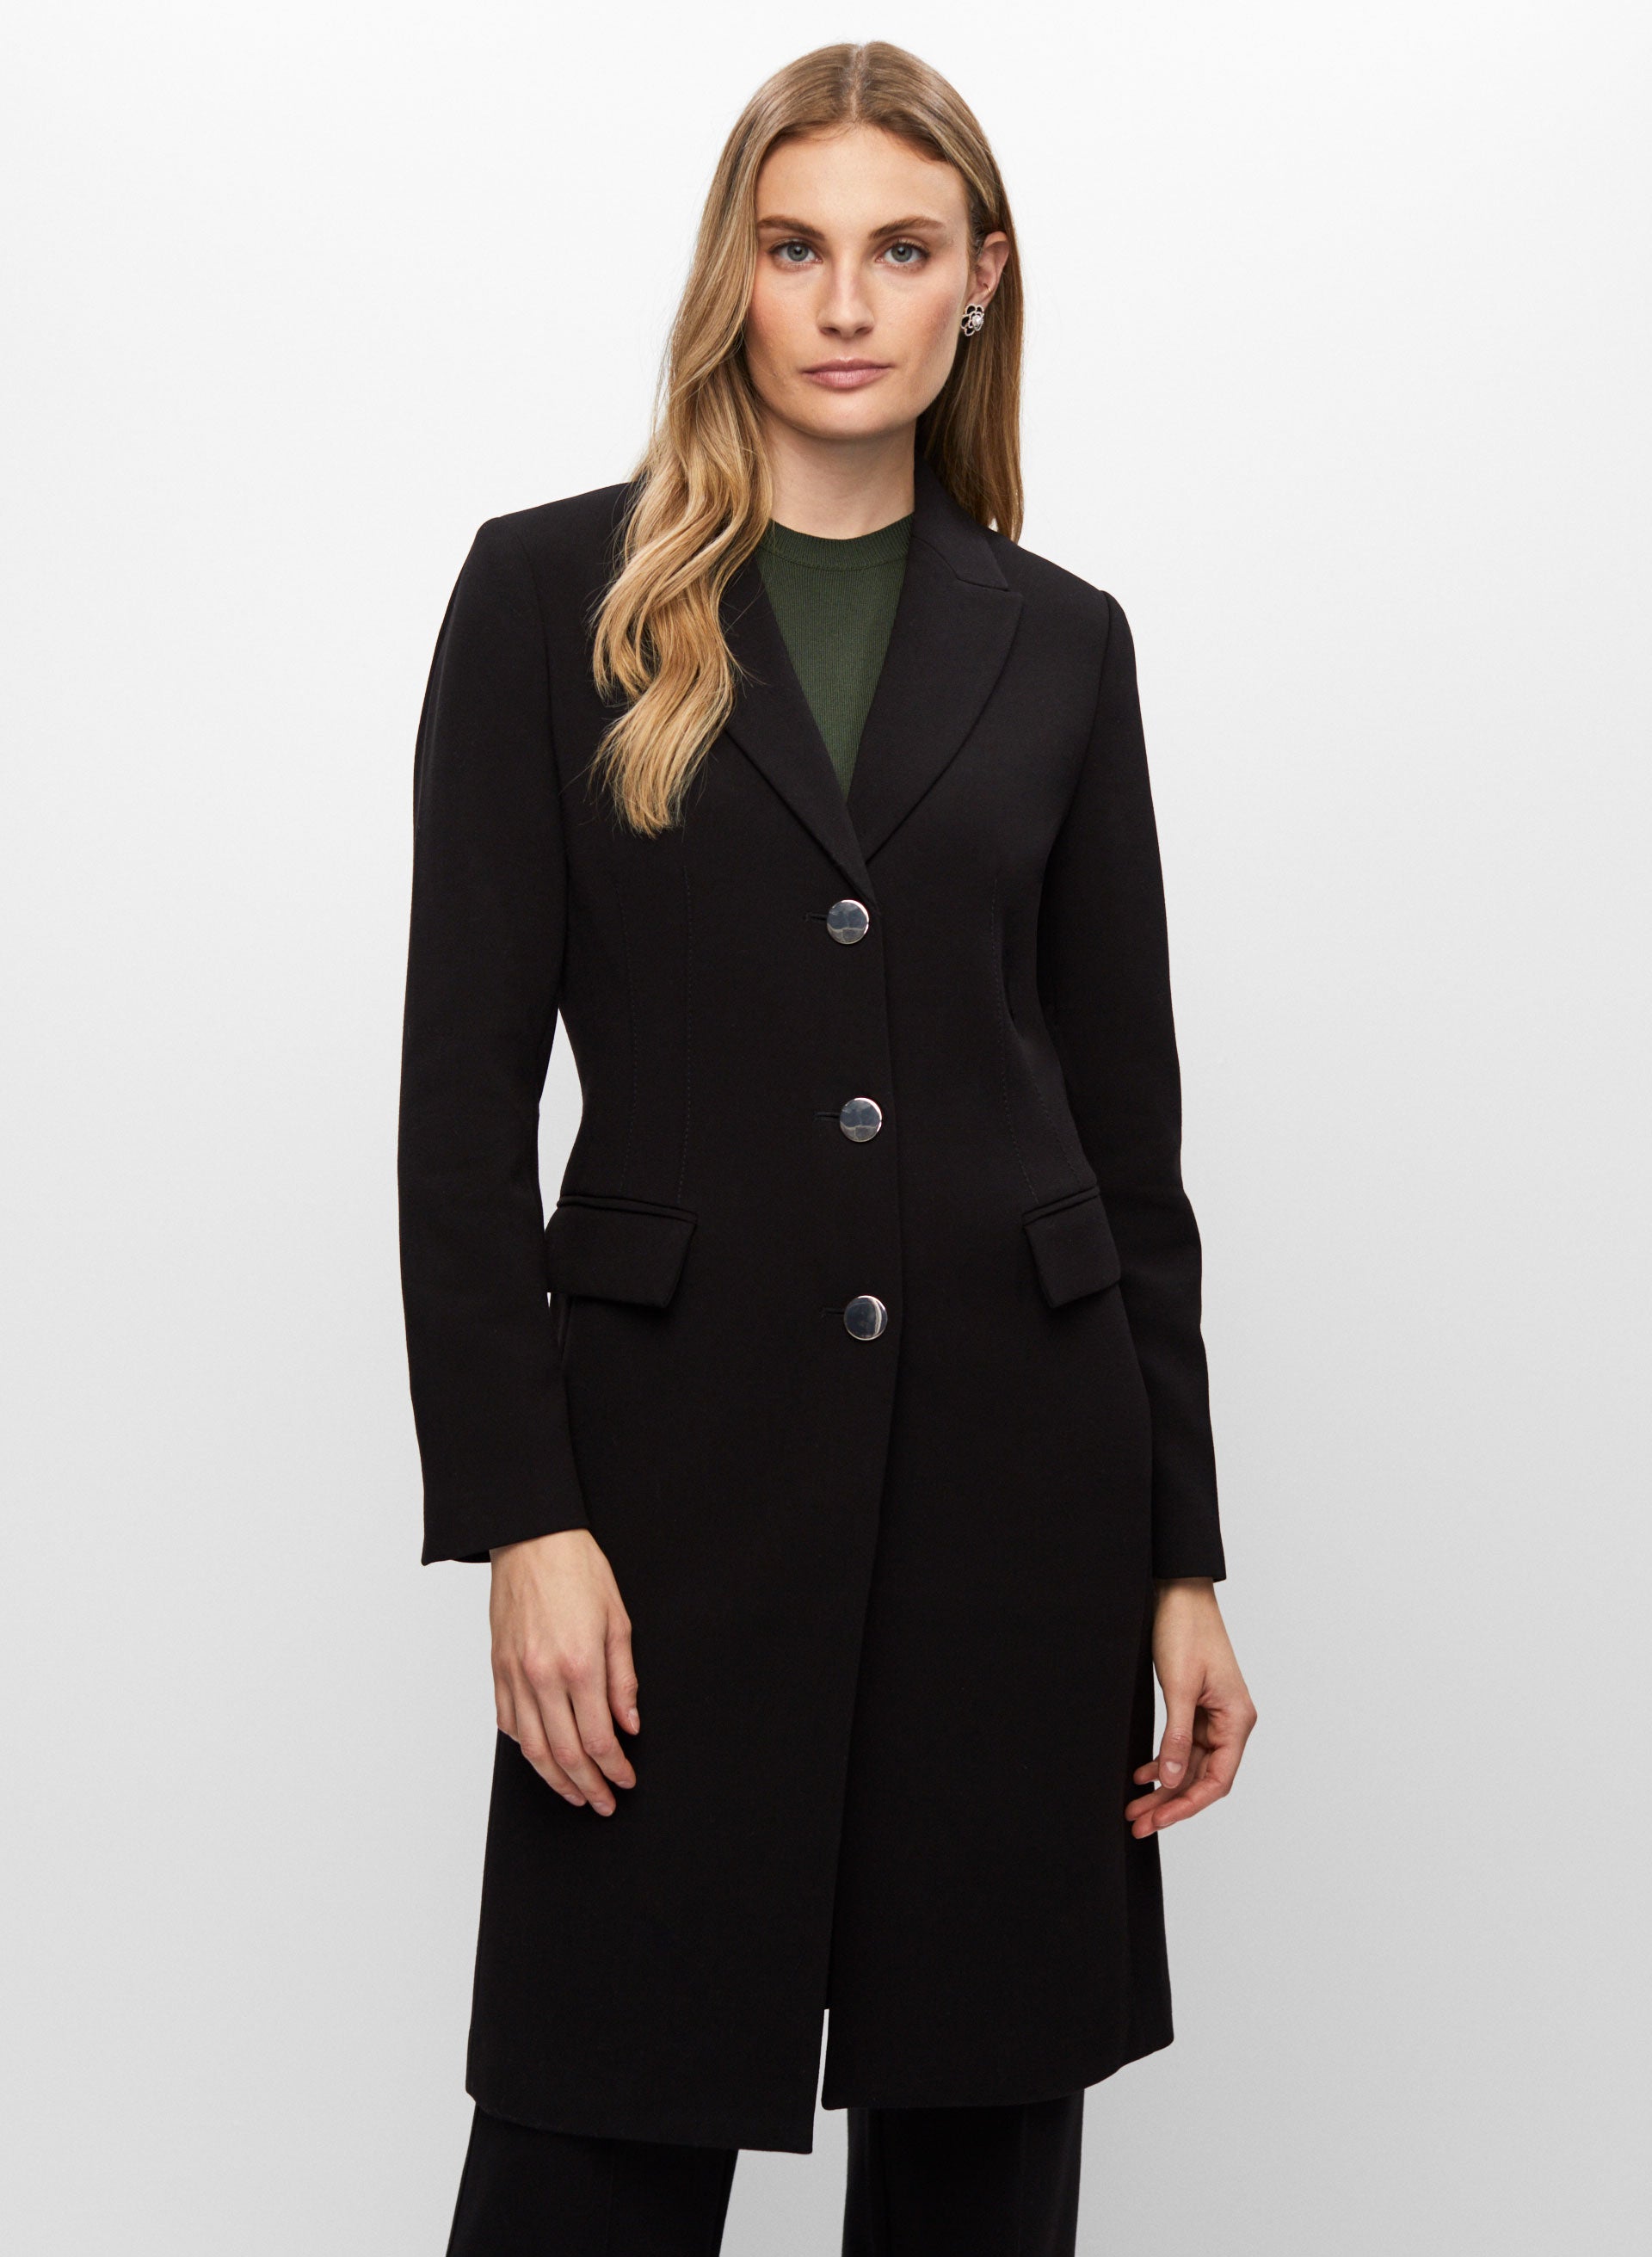 Notch Collar Single Breasted Overcoat